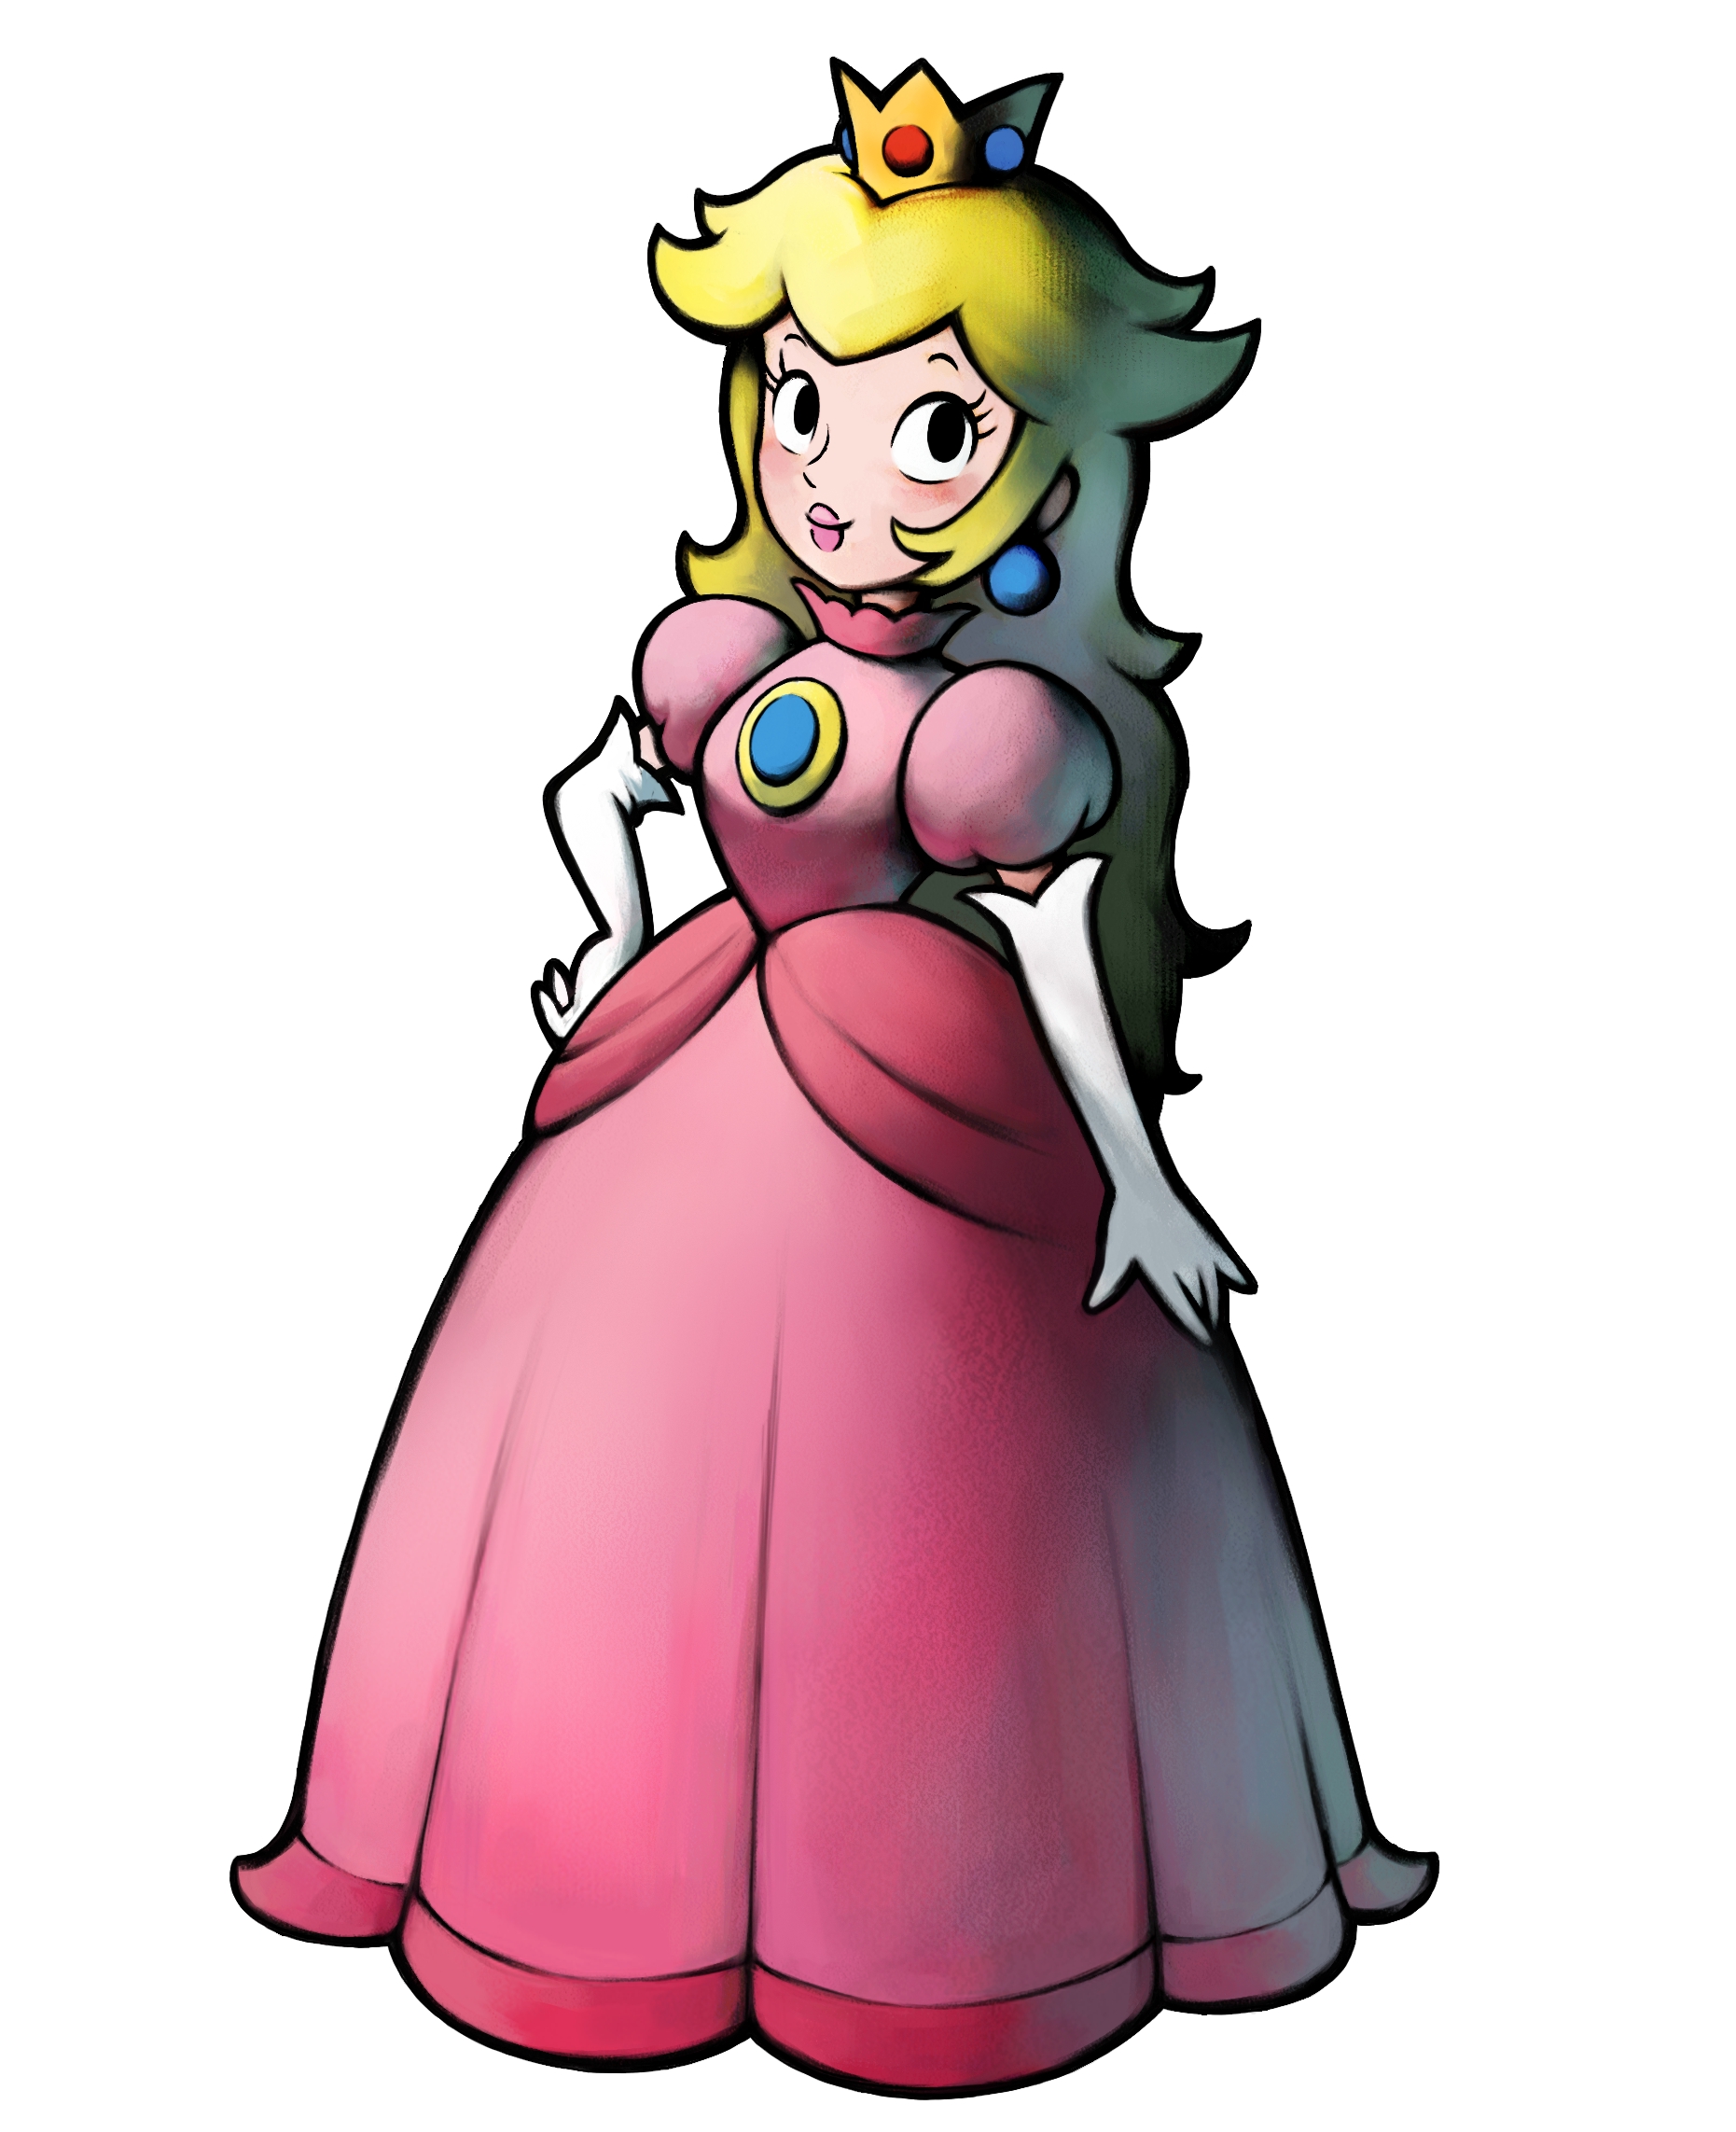 Takemoto has explained exactly why Princess Peach isn't a playable...